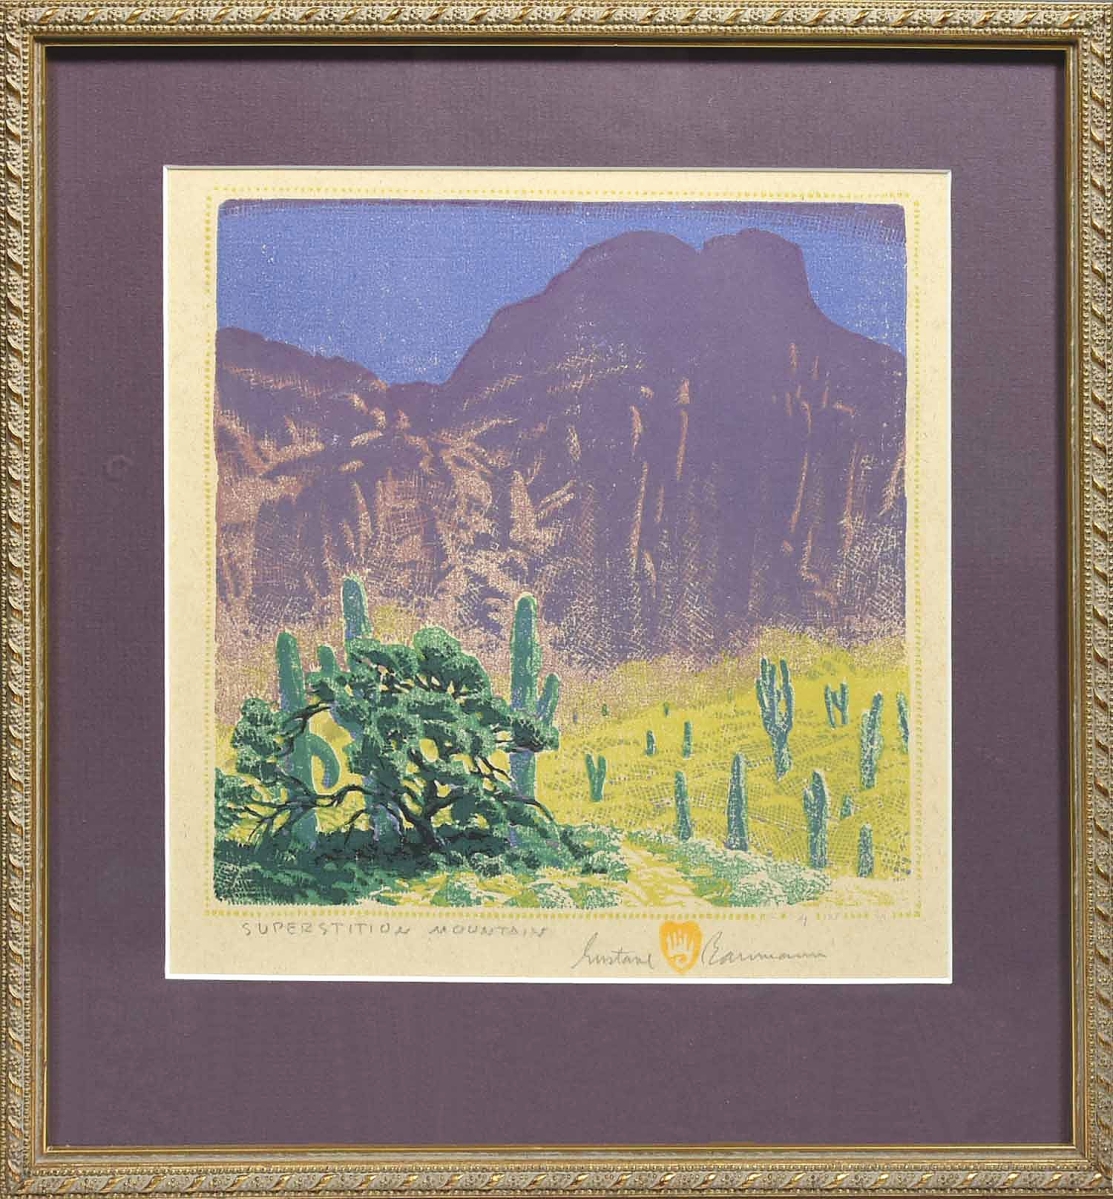 Leading the sale was a scarce 1949 woodcut by Gustave Baumann (1881-1971), one of the leading figures of the color woodcut revival in America. Soaring to $24,600 against an $800-$1,200 estimate, the work titled “Superstition Mountain,” #4/125, depicting the formation northwest of Florence, Ariz.